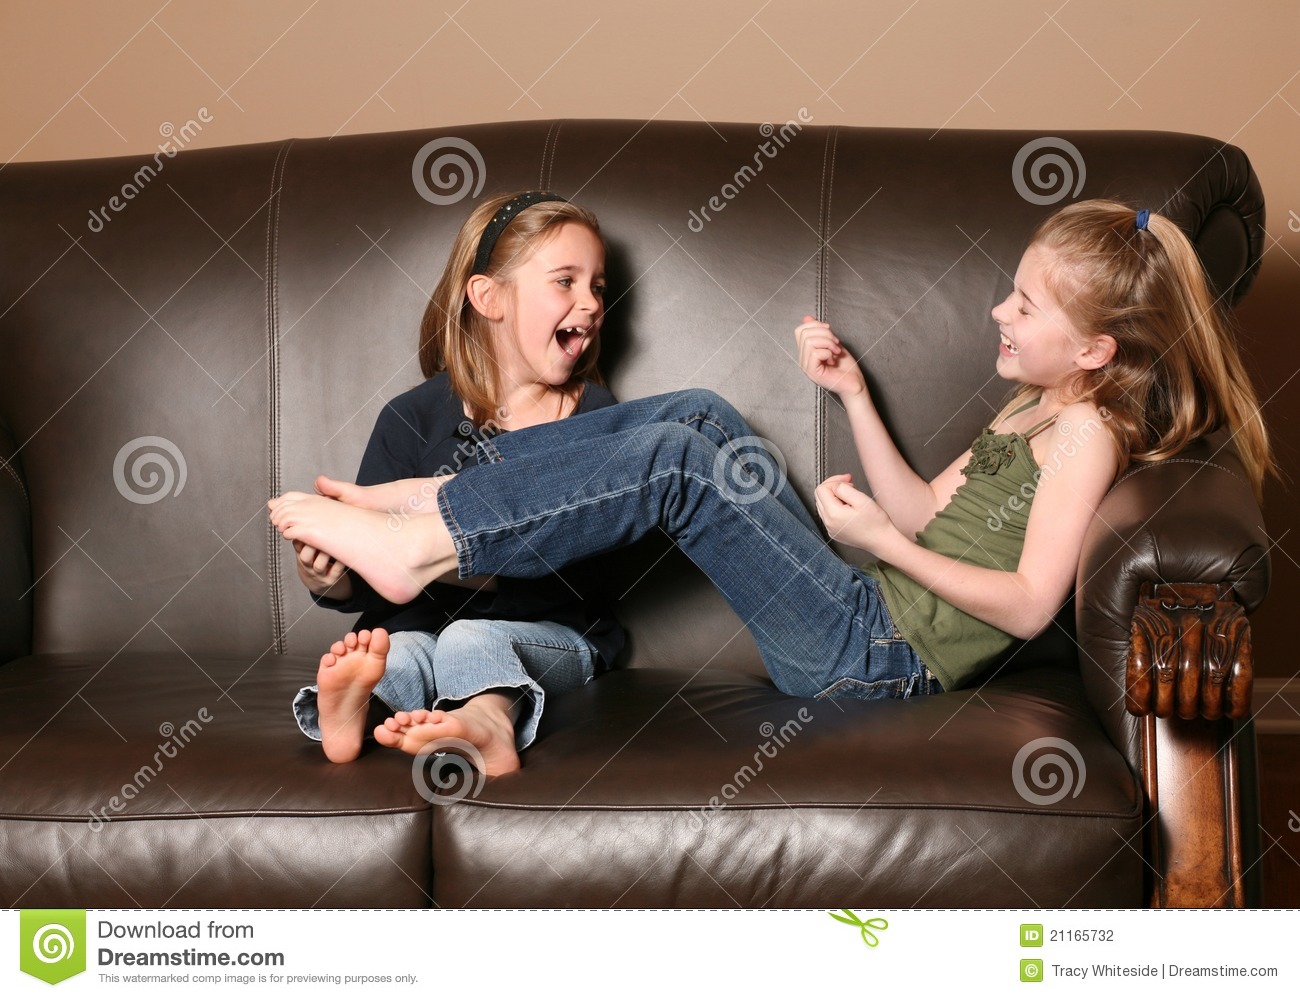 Clip Art Stock Photo Of A Little Girl Being Tickled By Her Mom